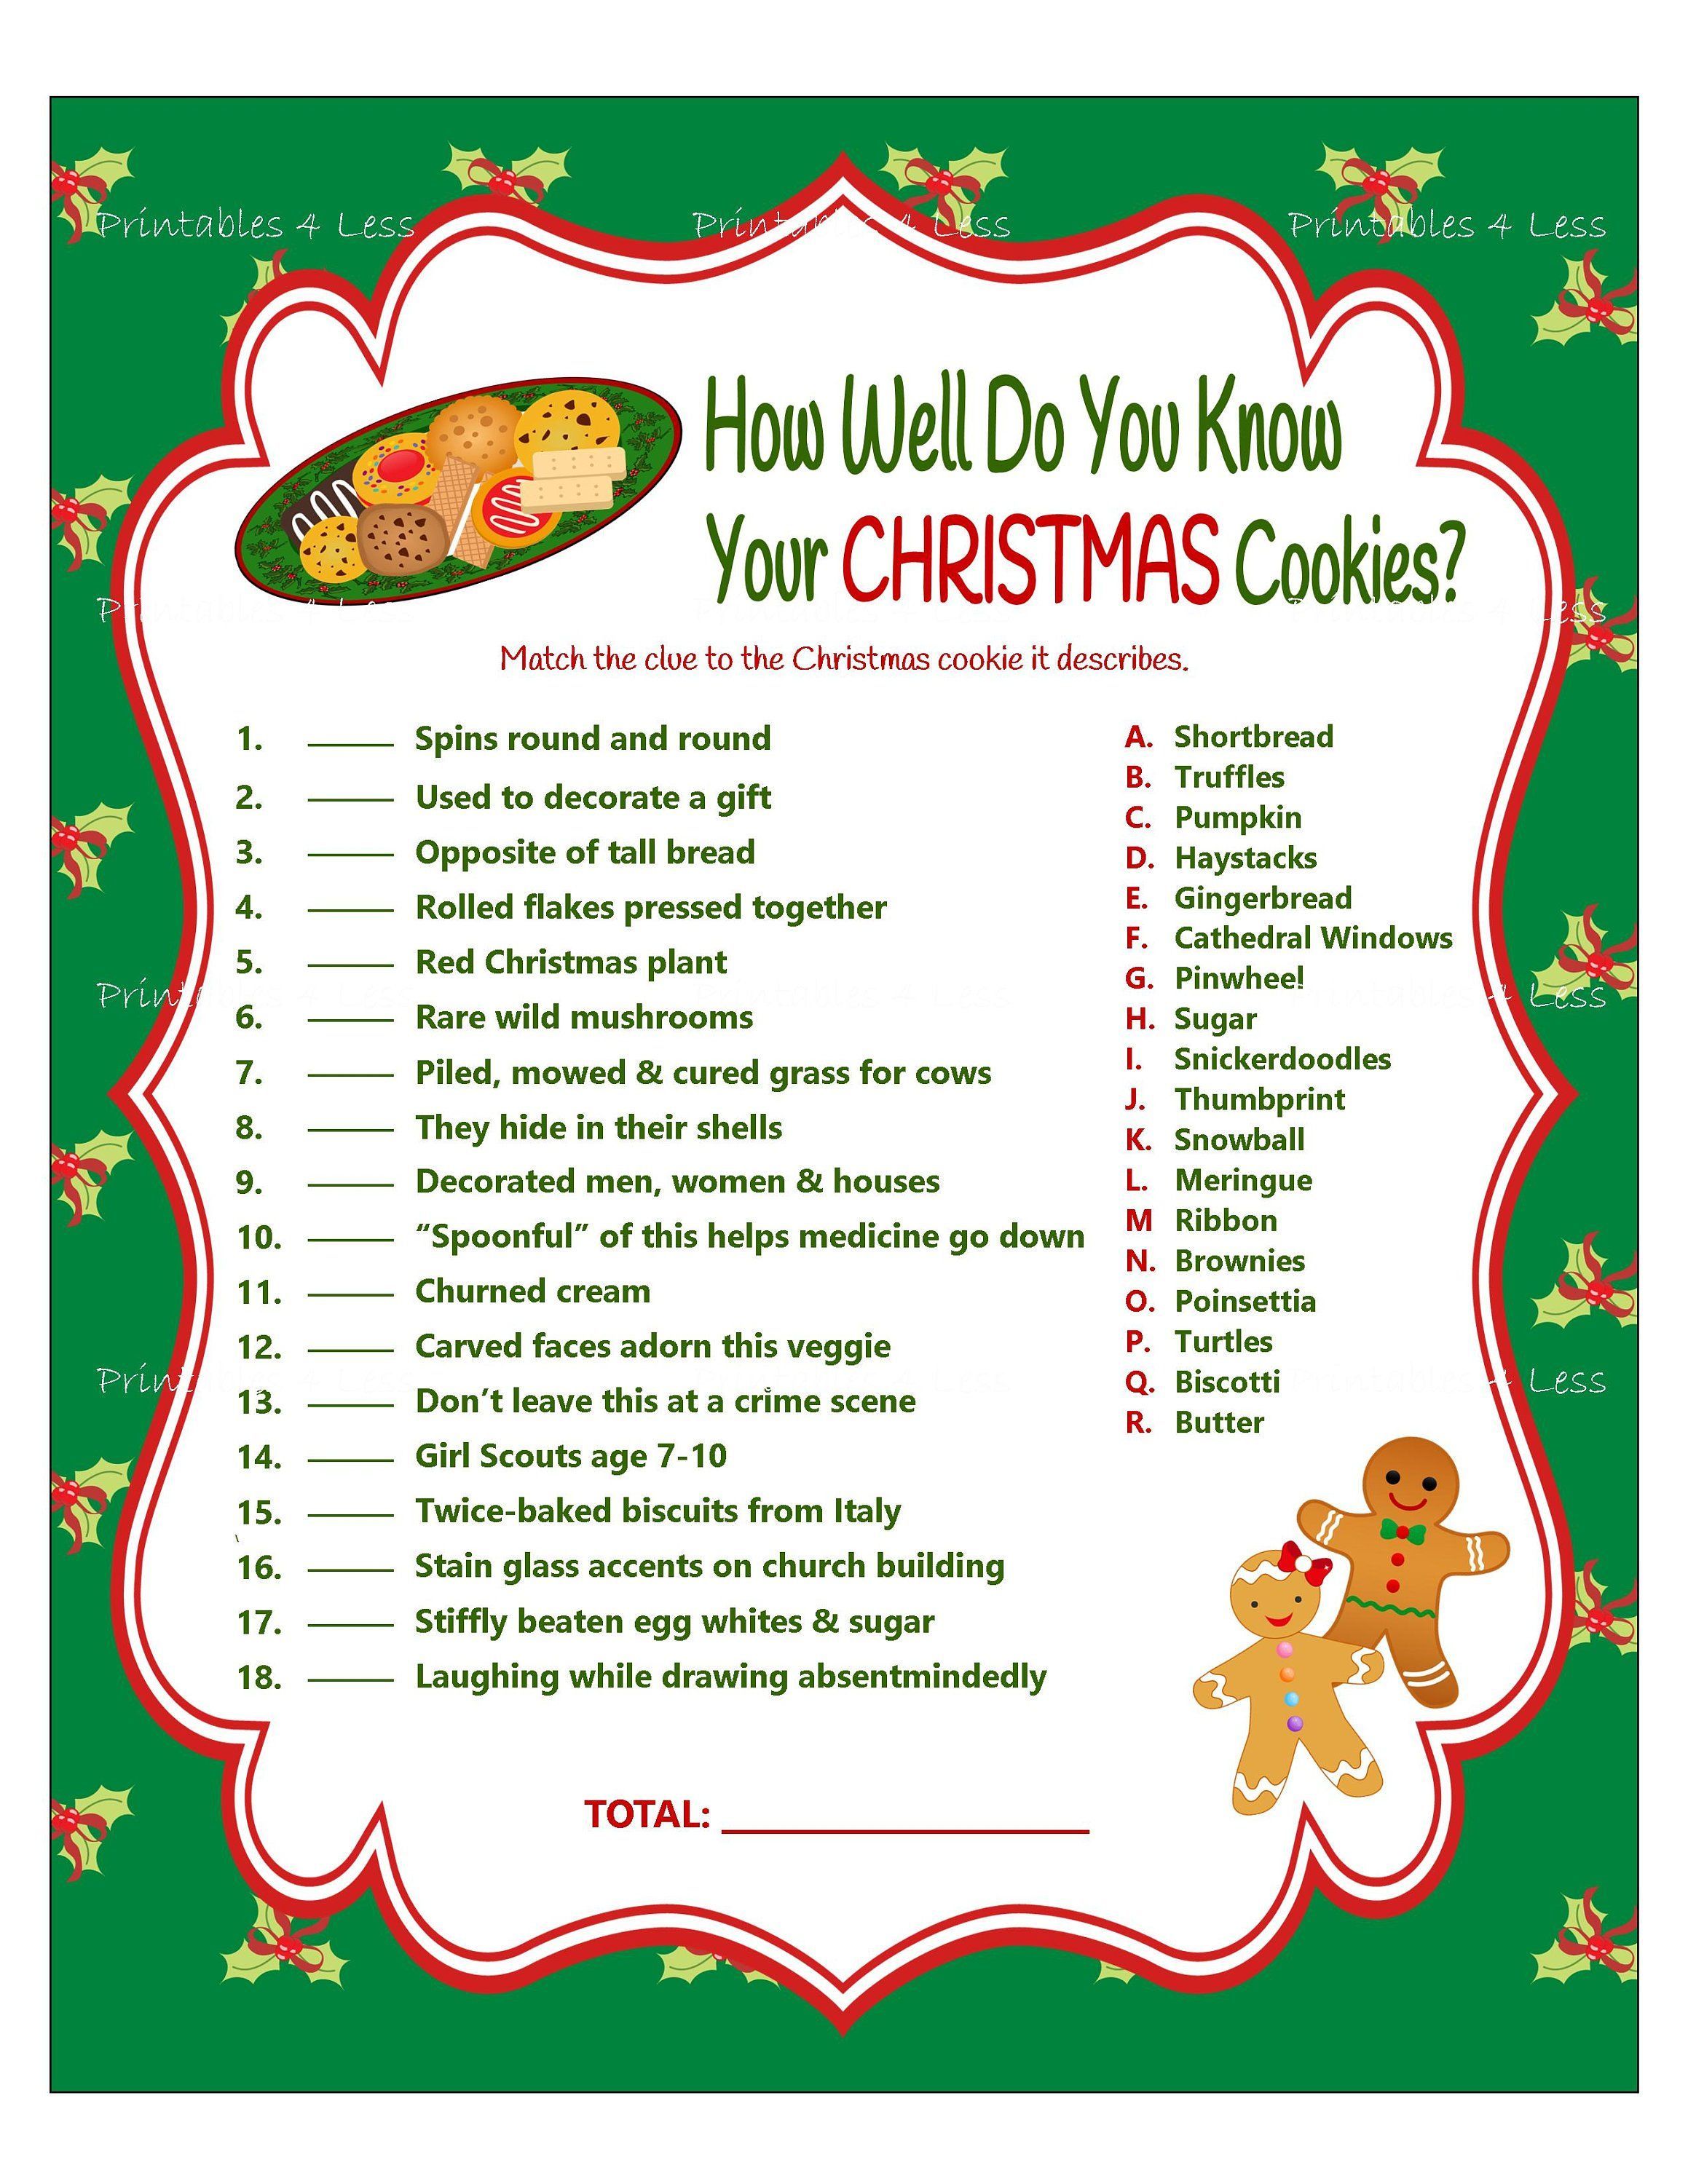 Christmas Game, Cookie Jar Game, Christmas Party Game, Holiday Party Game, Christmas Word Game, Printable Xmas Game - Printables 4 Less -   18 holiday Sayings parties ideas